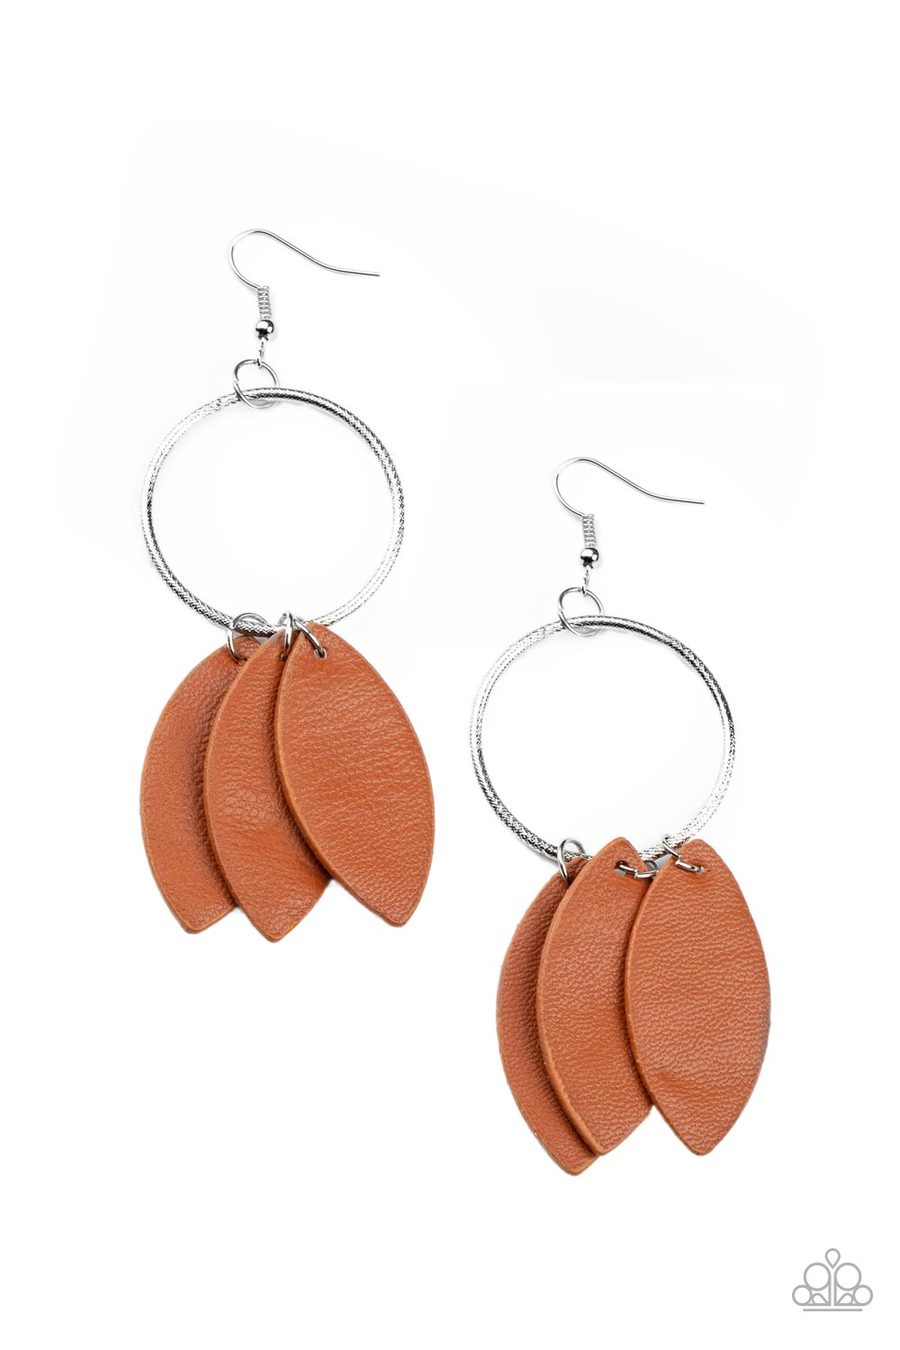 PAPARAZZI  EARRINGS  LEAFY LAGUNA - BROWN LEATHER SILVER CIRCLE